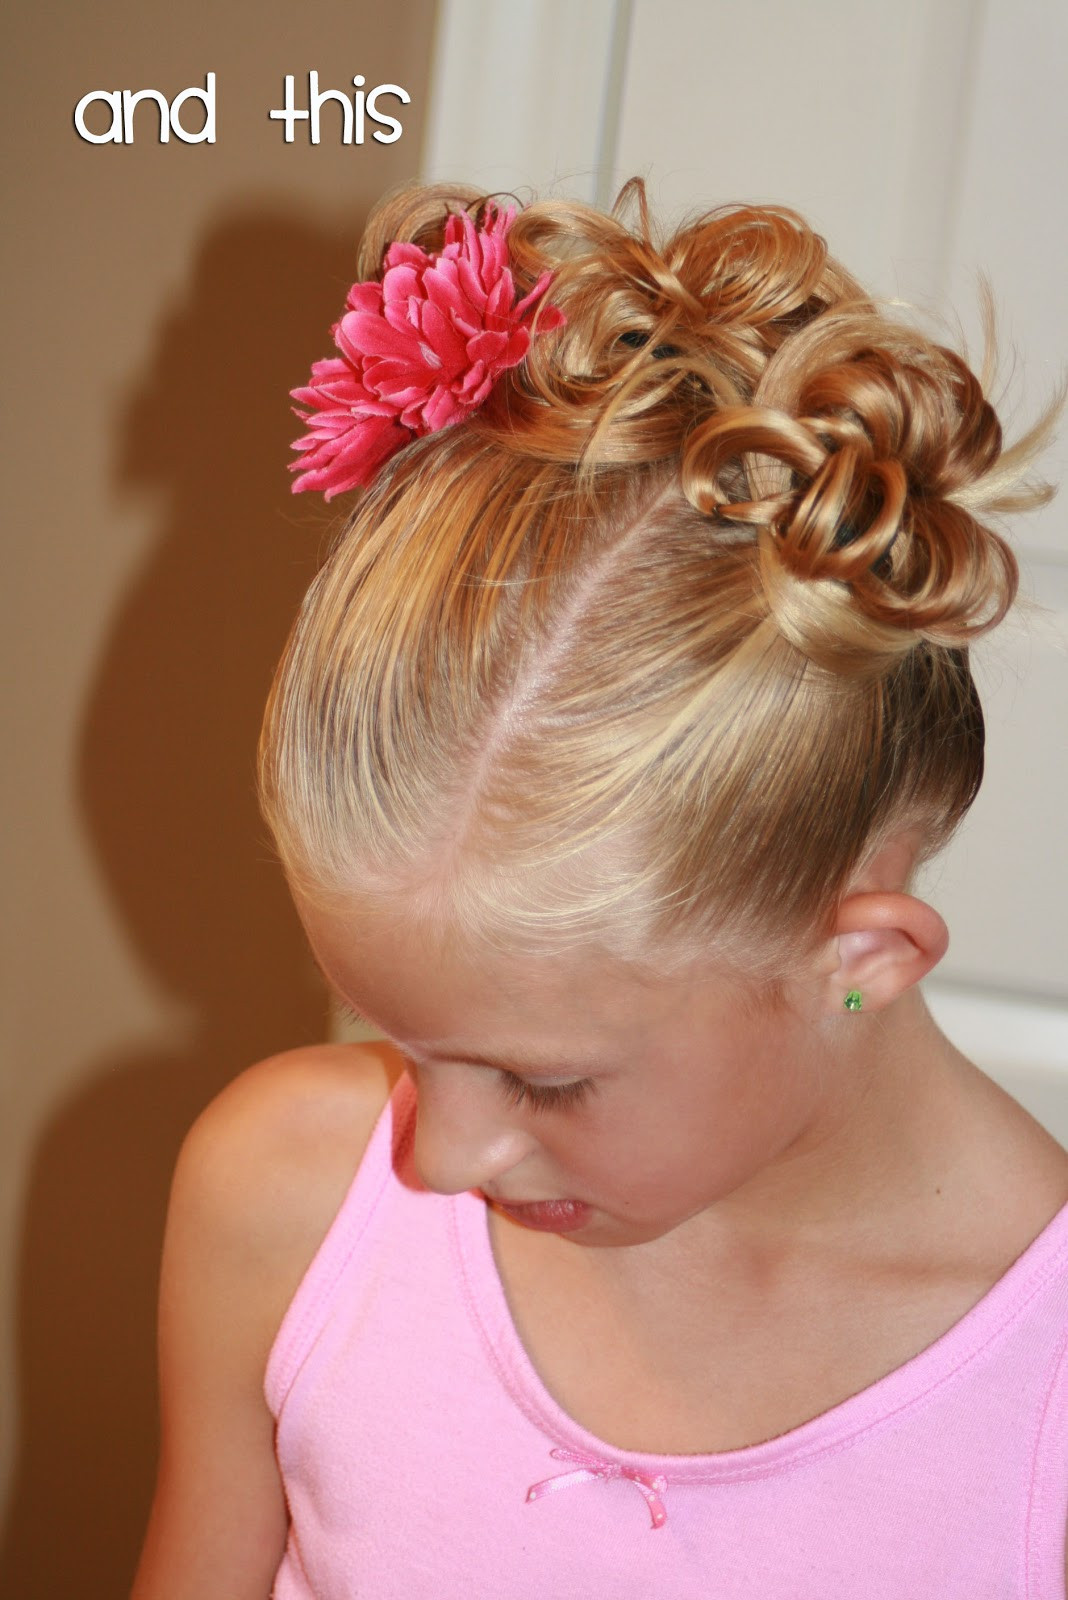 Images Of Little Girls Hairstyles
 Simple Hairstyles For Little Girls REASONS TO SKIP THE